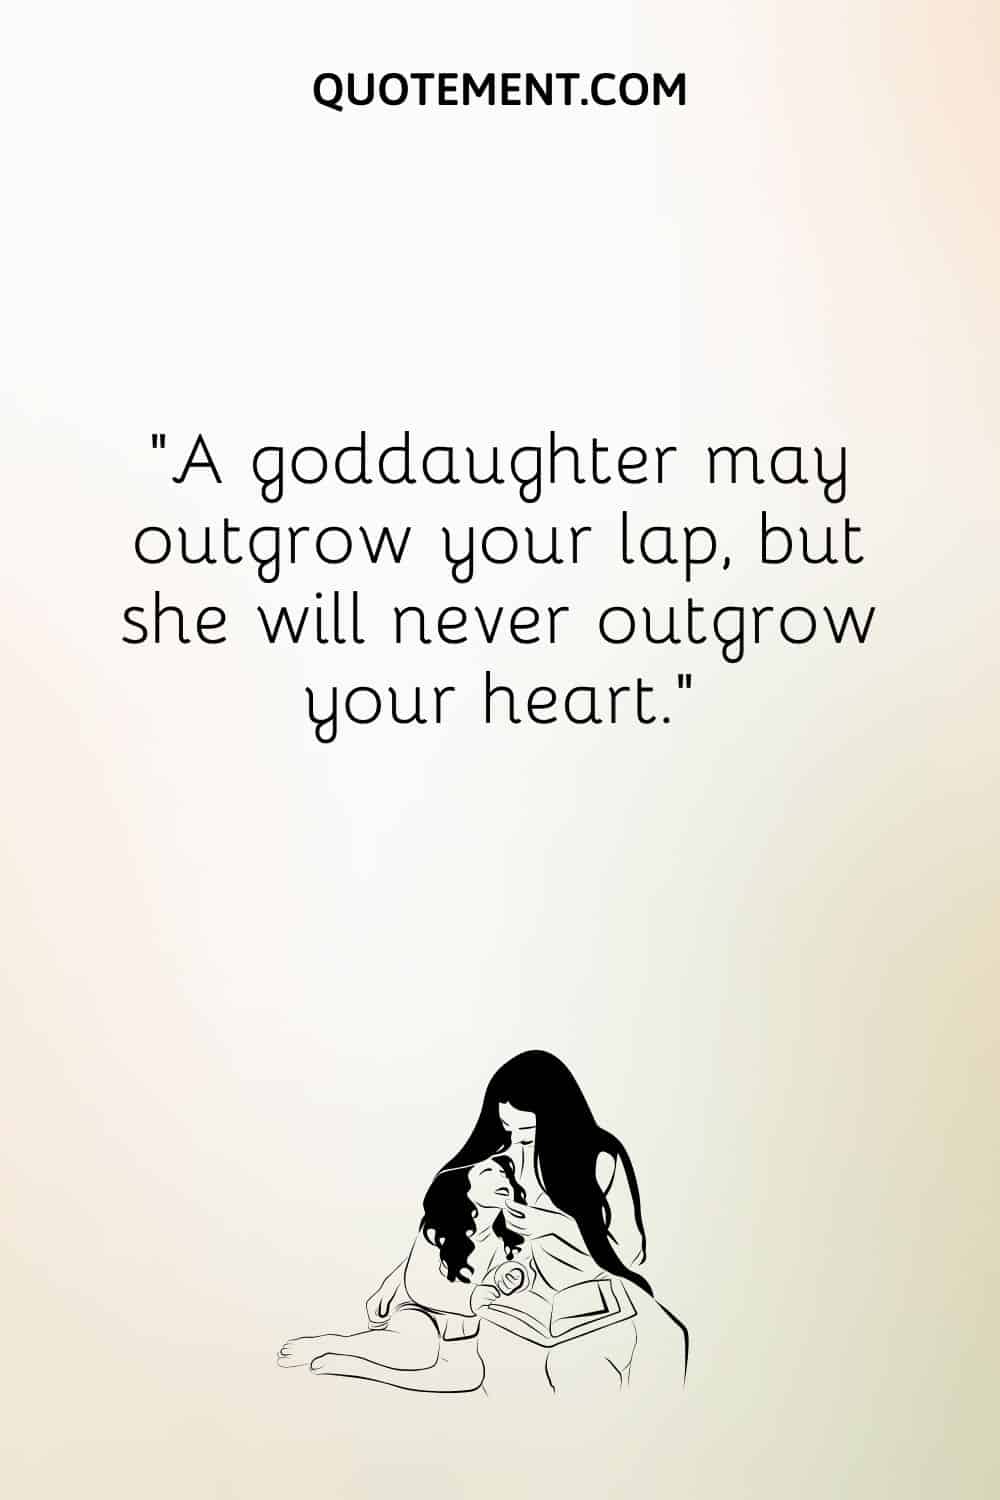 120 Most Beautiful Goddaughter Quotes To Melt Her Heart